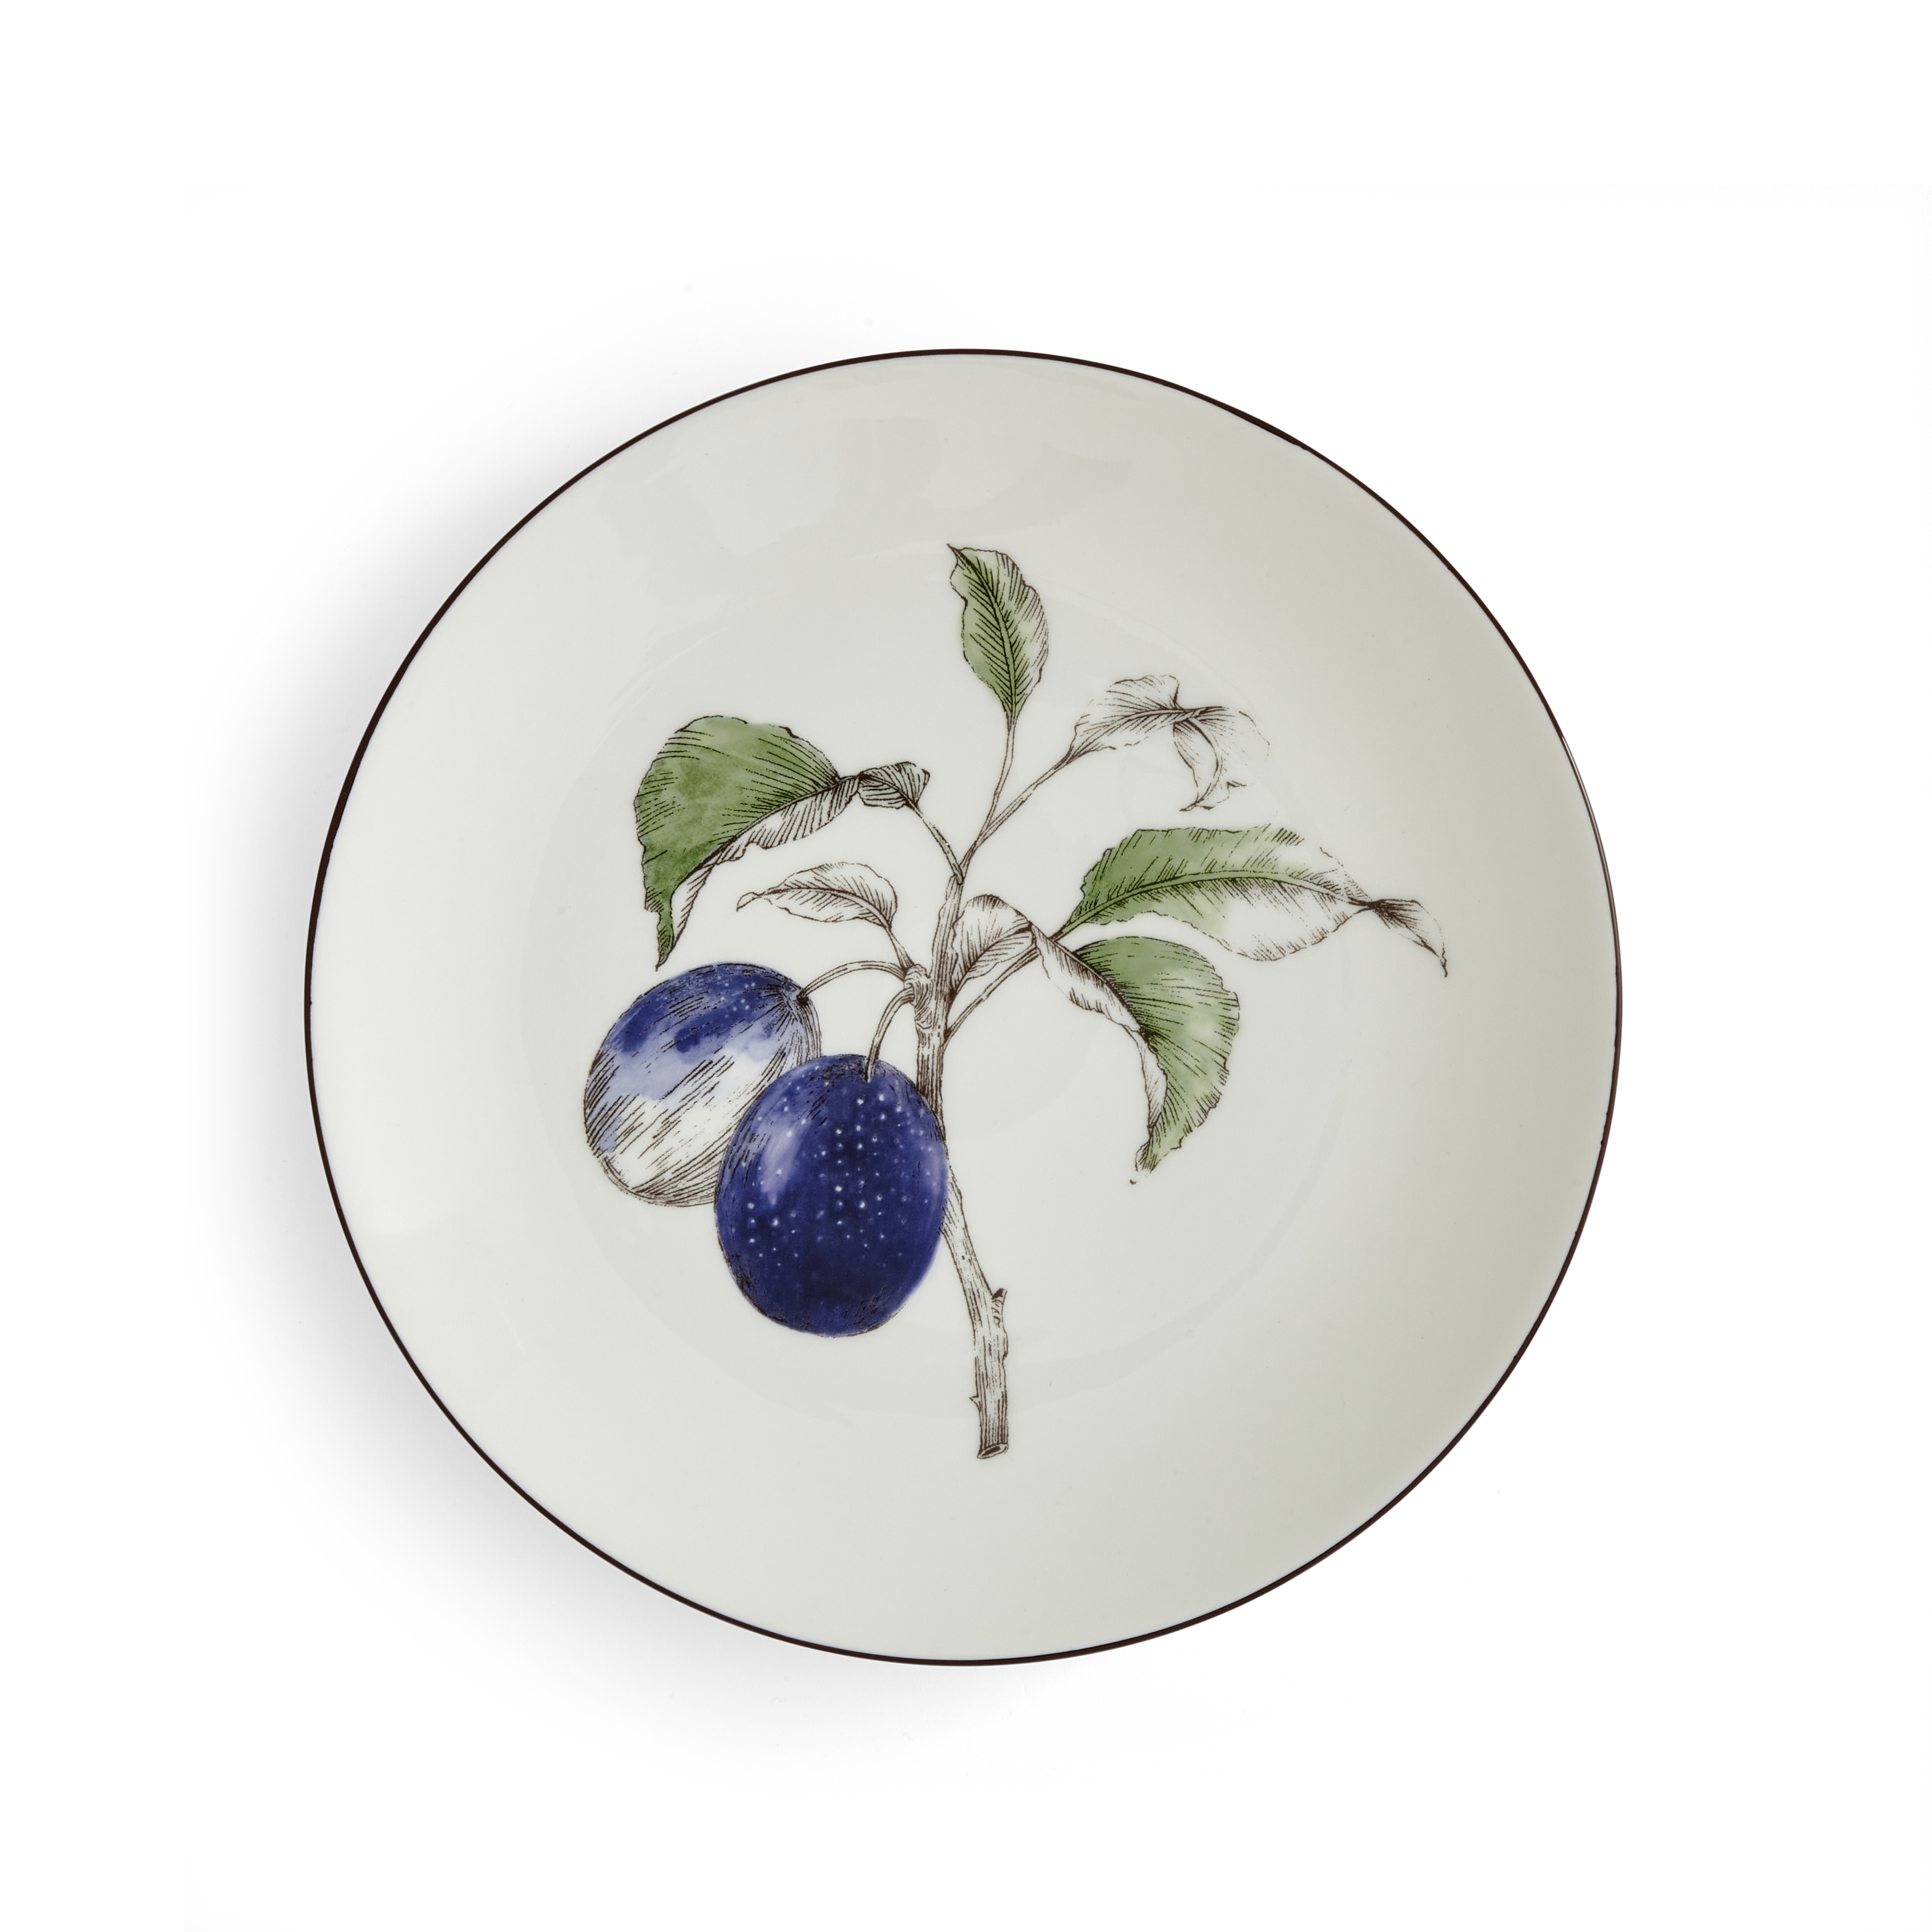 Nature's Bounty 4 Piece Place Setting, Plum image number null